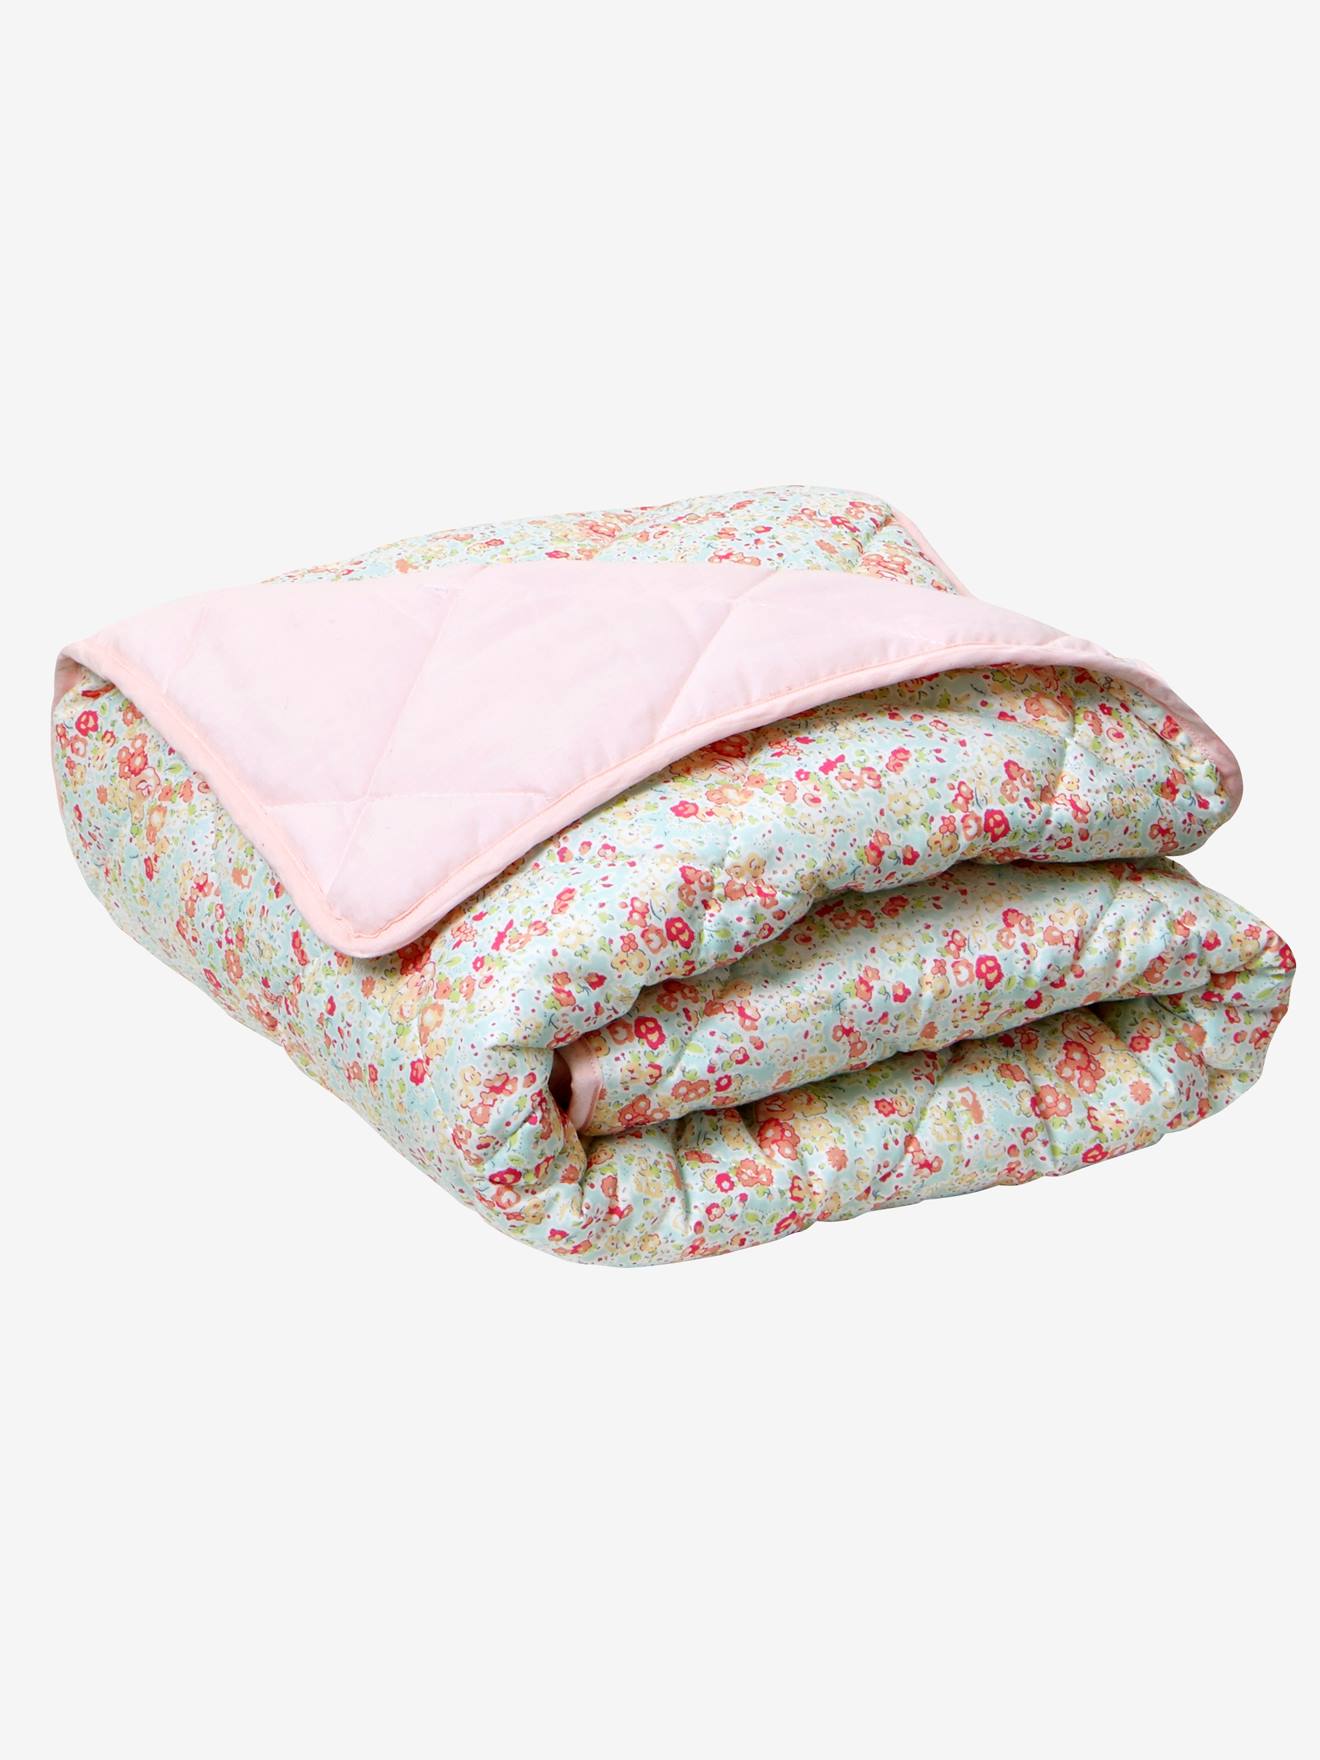 Light Weight Four Seasons Beddingleer Childrens Color Leaves COTTON 150 X 200CM Single Quilted Bedspread Patchwork Throws 